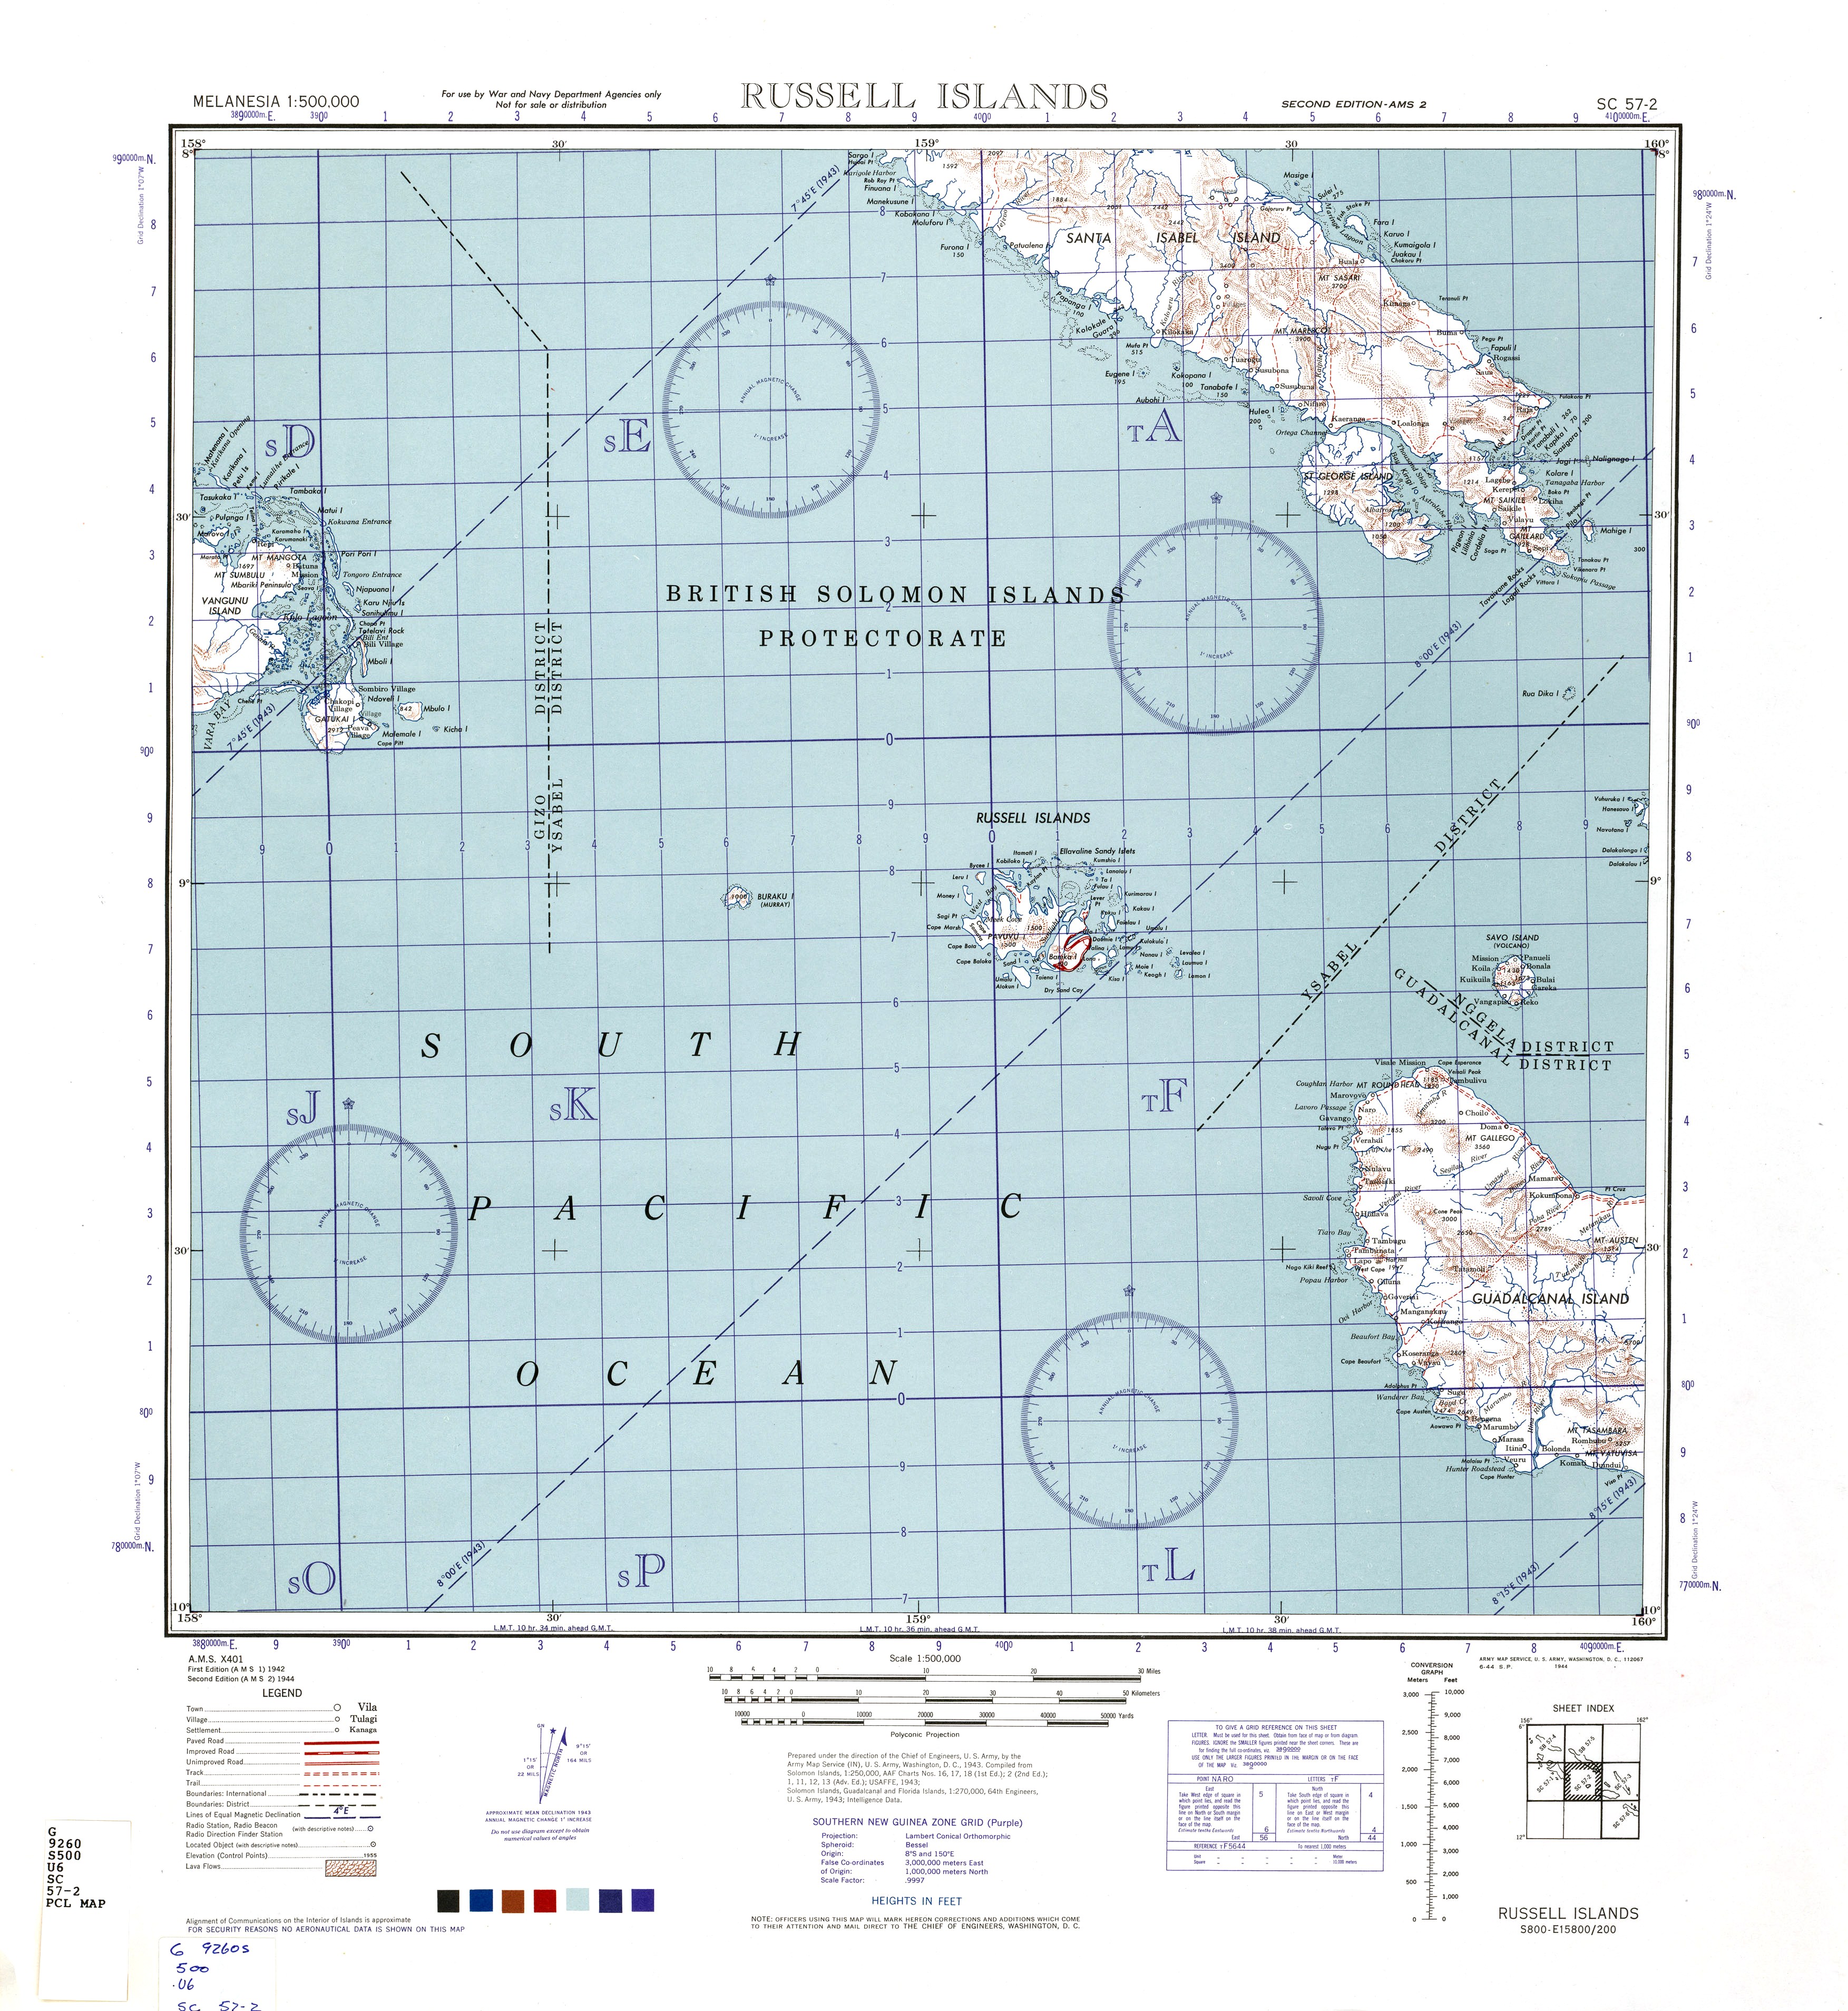 1943 United States Army map of western Guadalcanal and the Russel Islands in the Solomon chain.